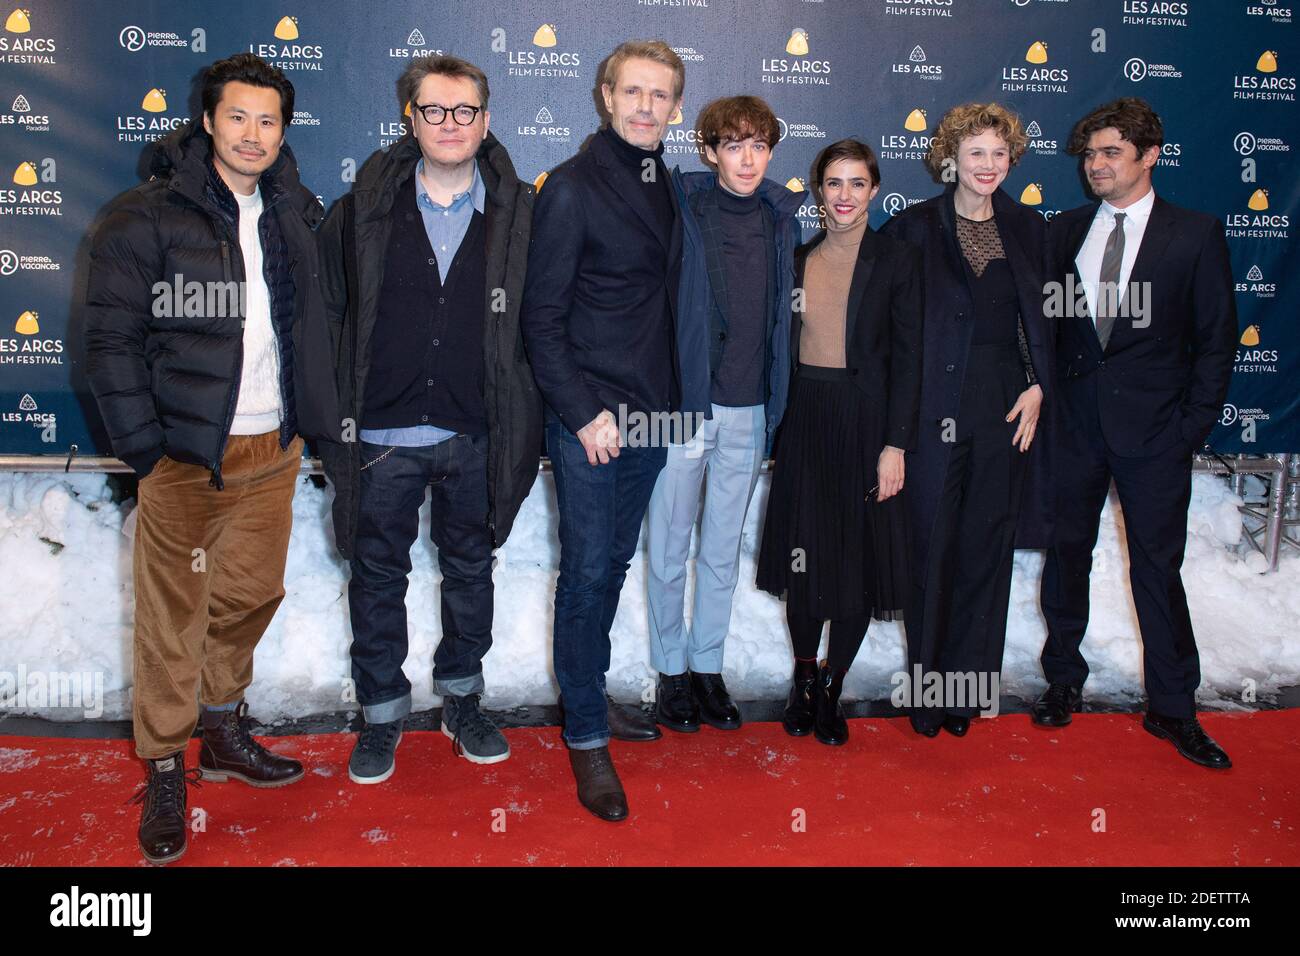 Frederic Chau, Regis Roinsard, Lambert Wilson, Alex Lawther, Maria Leite, Anna Maria Sturm and Riccardo Scamarcio attending the Opening Ceremony of the 11th Les Arcs Film Festival in Les Arcs, France on December 14, 2019. Photo by Aurore Marechal/ABACAPRESS.COM Stock Photo